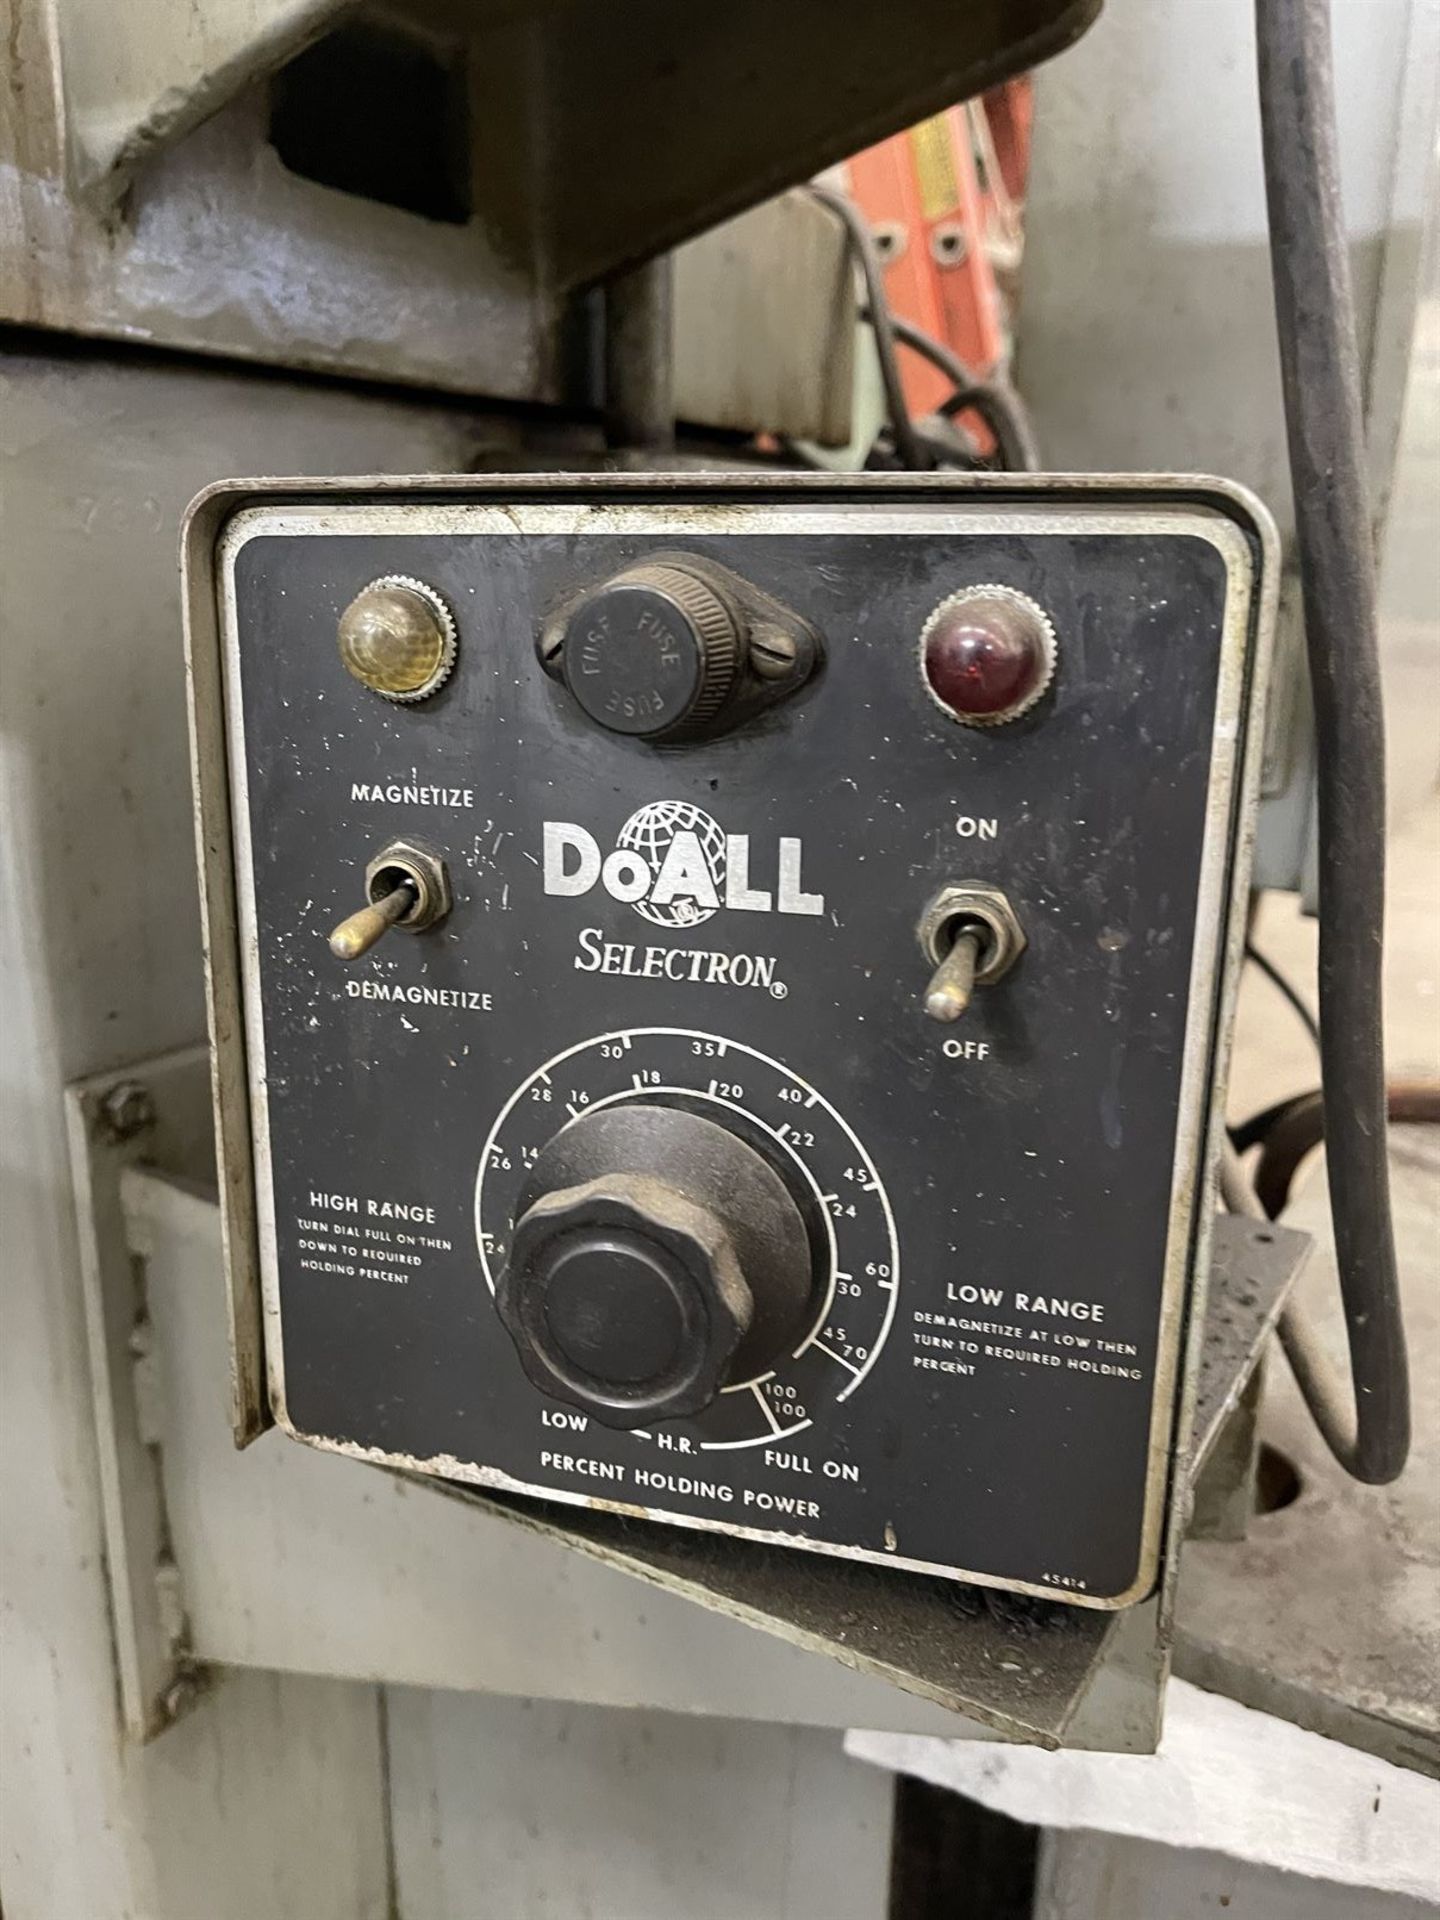 DOALL D618-7 Surface Grinder, s/n 219-75709, 6" x 18" Magnetic Chuck, Power Feed, DoAll Selectron - Image 7 of 7